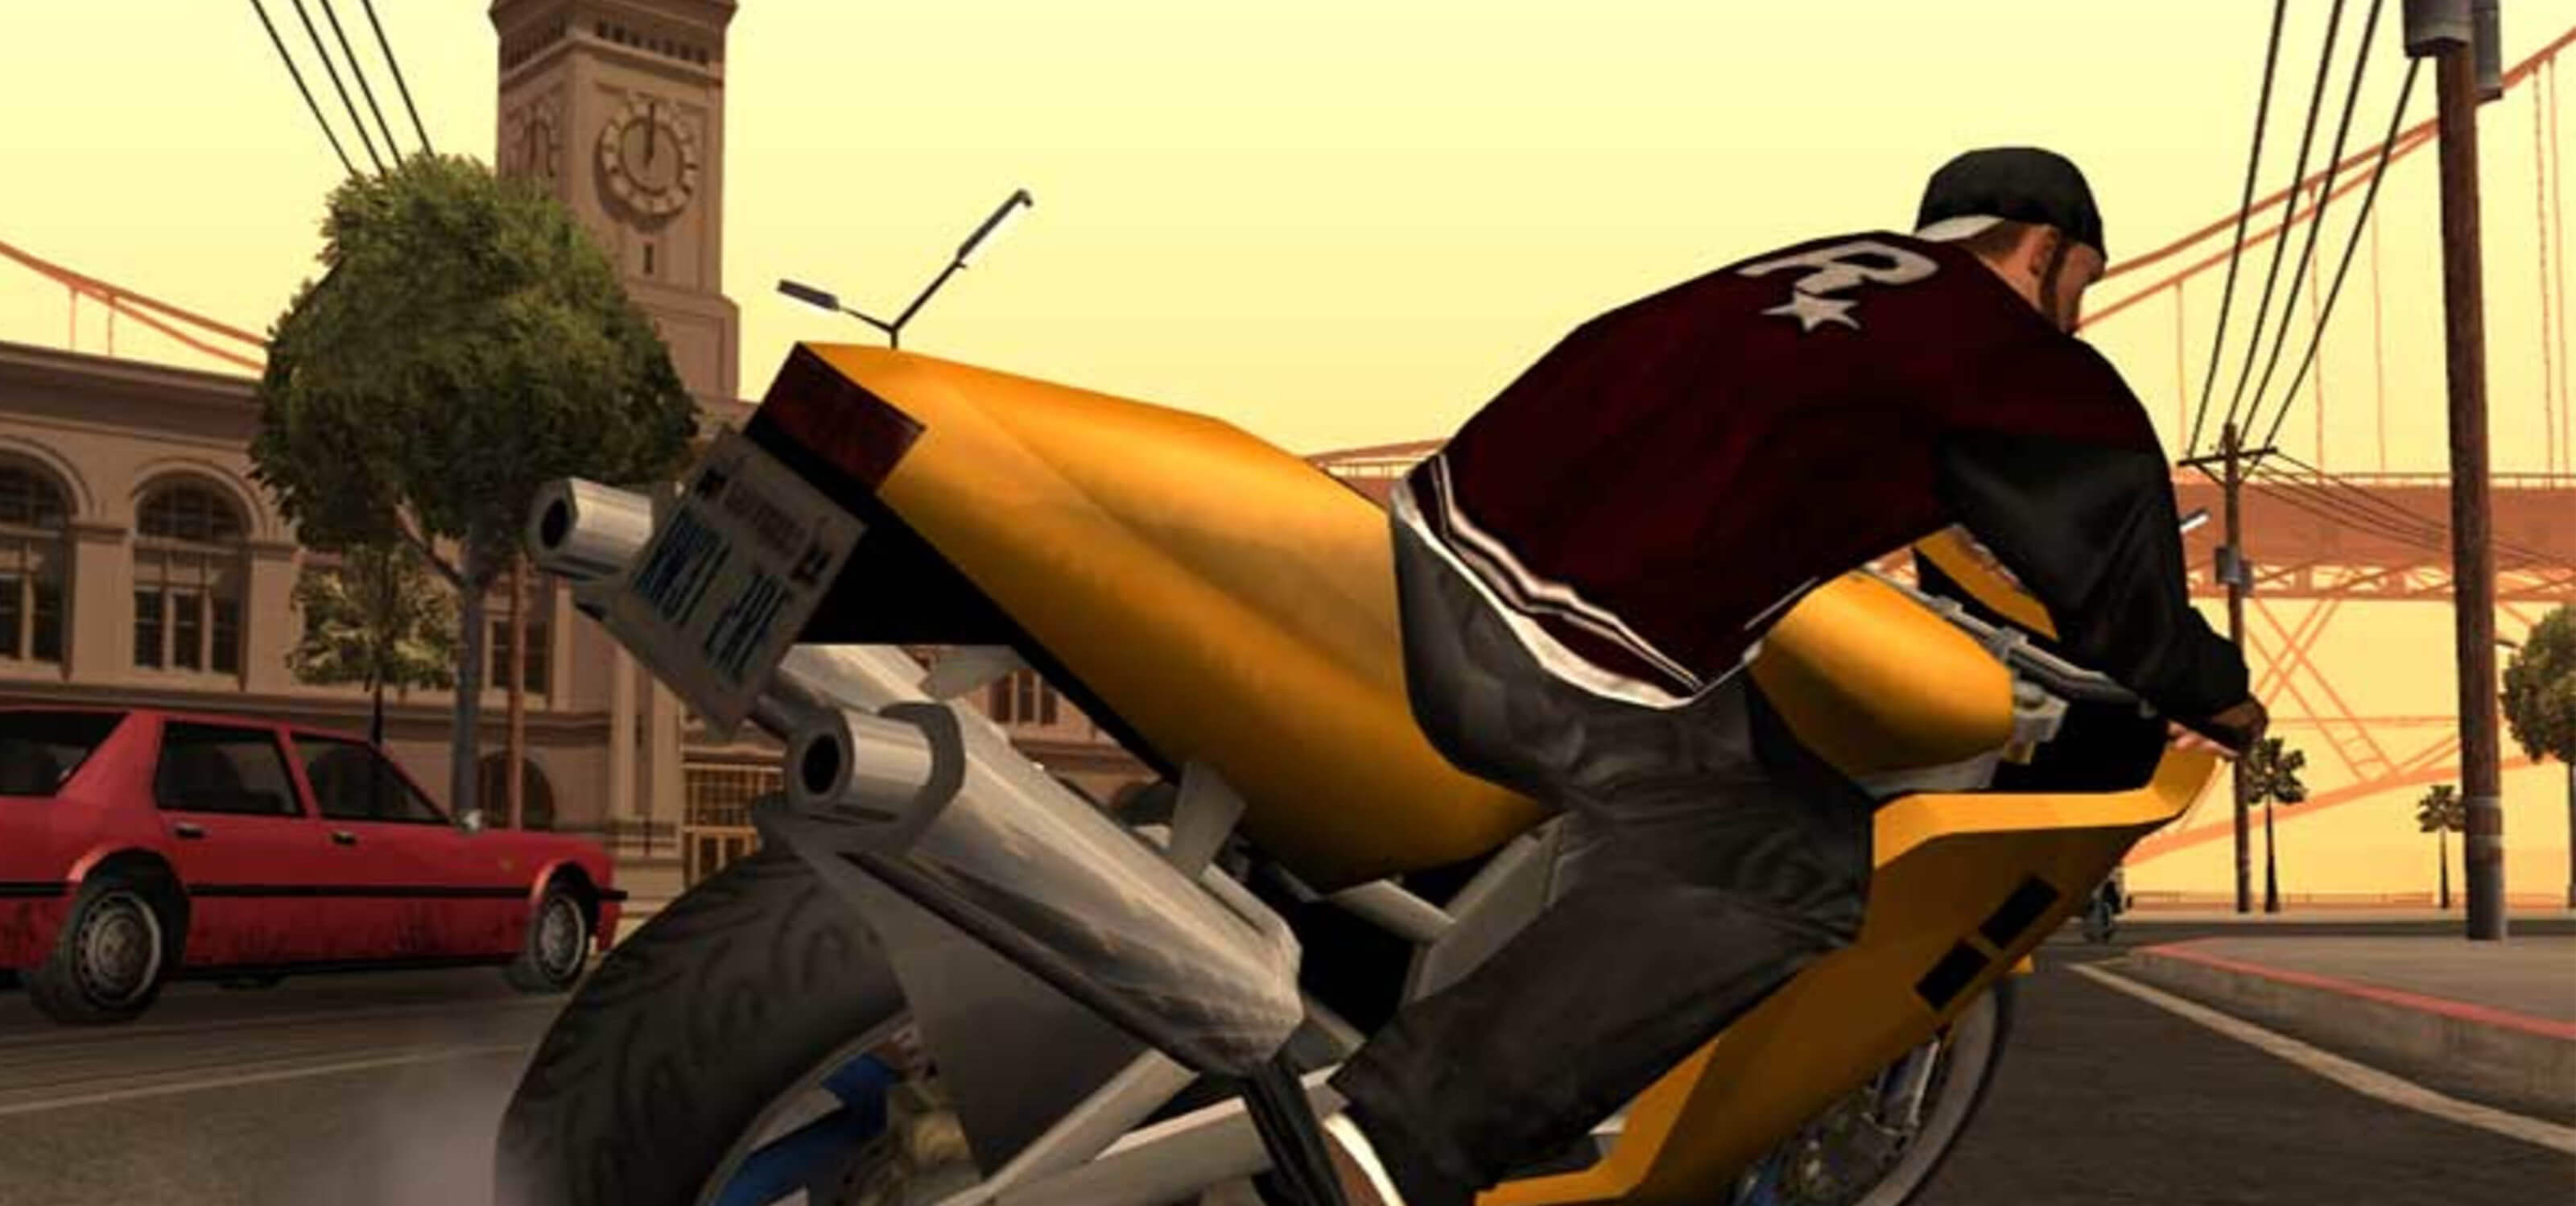 A screenshot from Grand Theft Auto: San Andreas of a man in a jacket with the Rockstar logo on it riding a gold motorcycle.